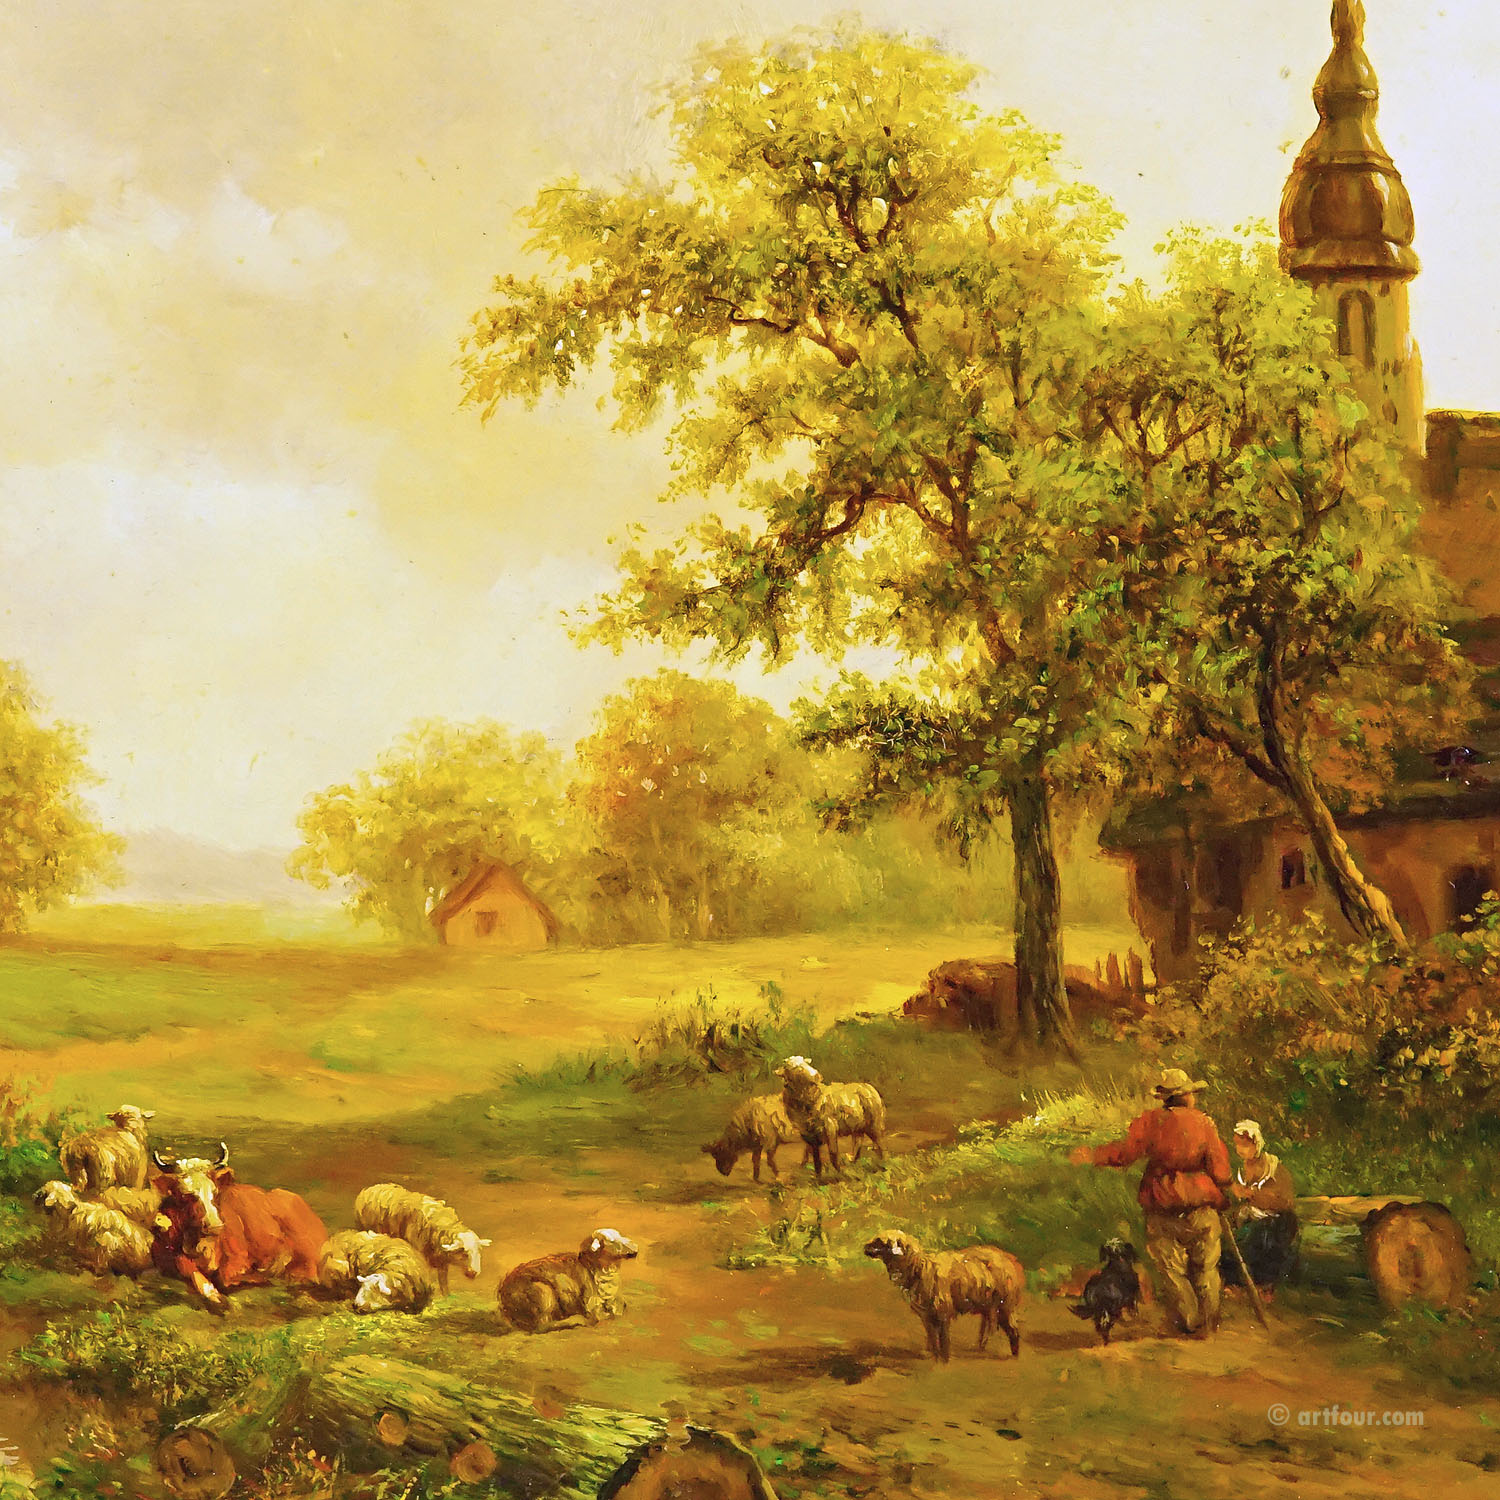 Shepherd with Herd in a Victorian Landscape, Oil on Wood 19th century